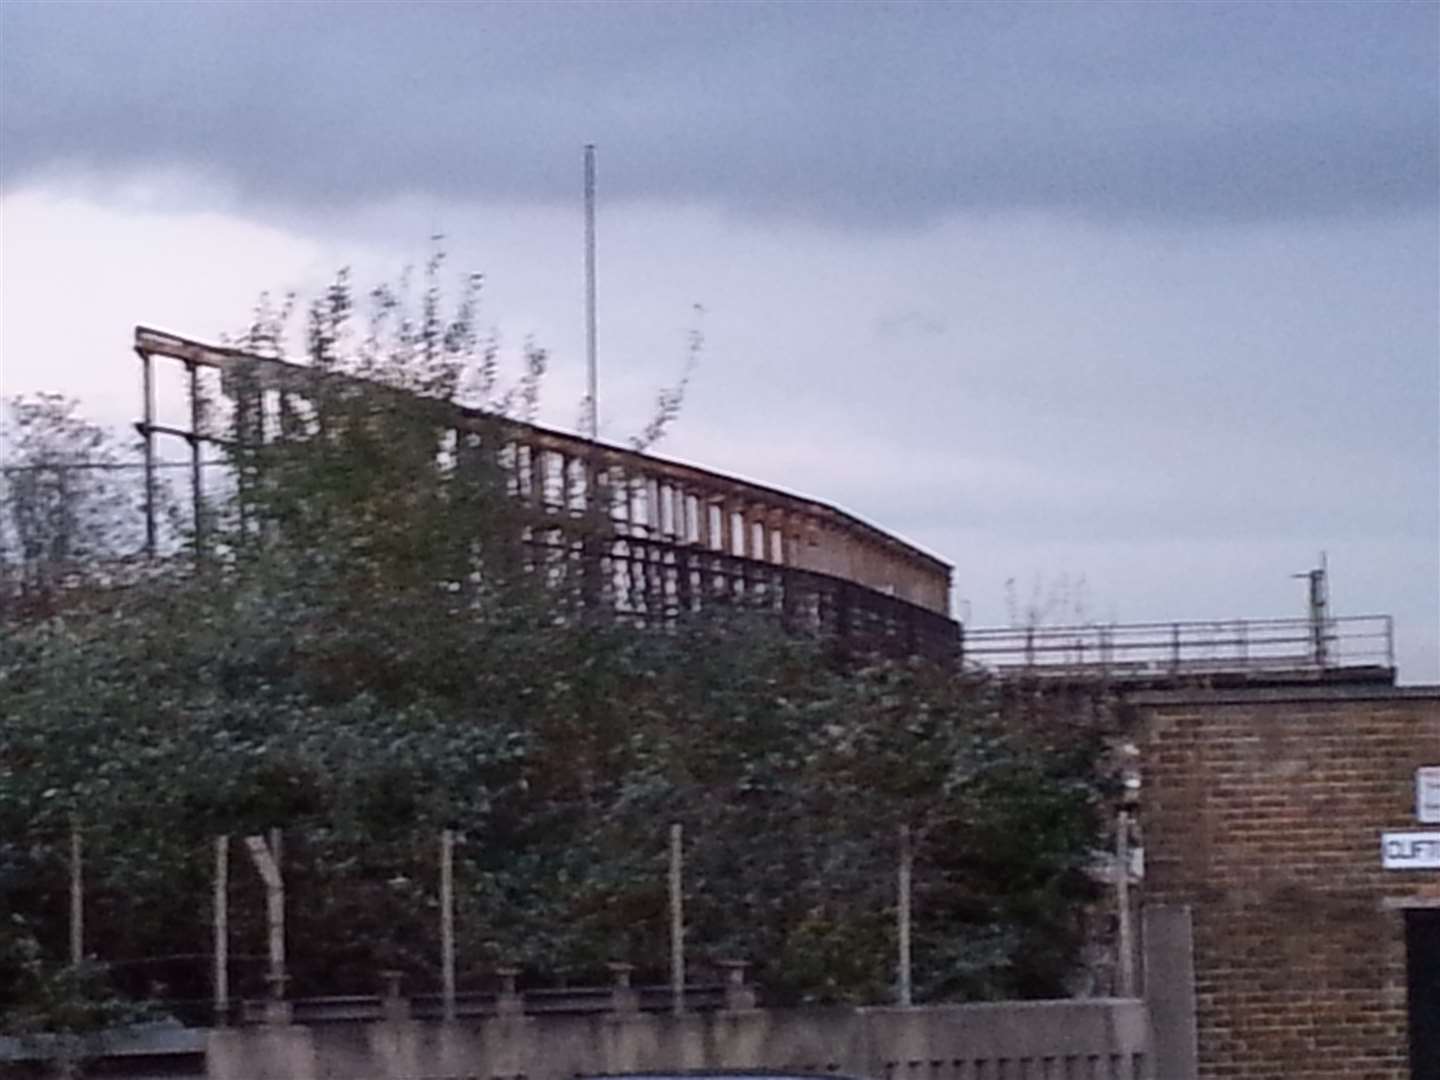 Restoration of the historic pier off West Street is part of the development plans